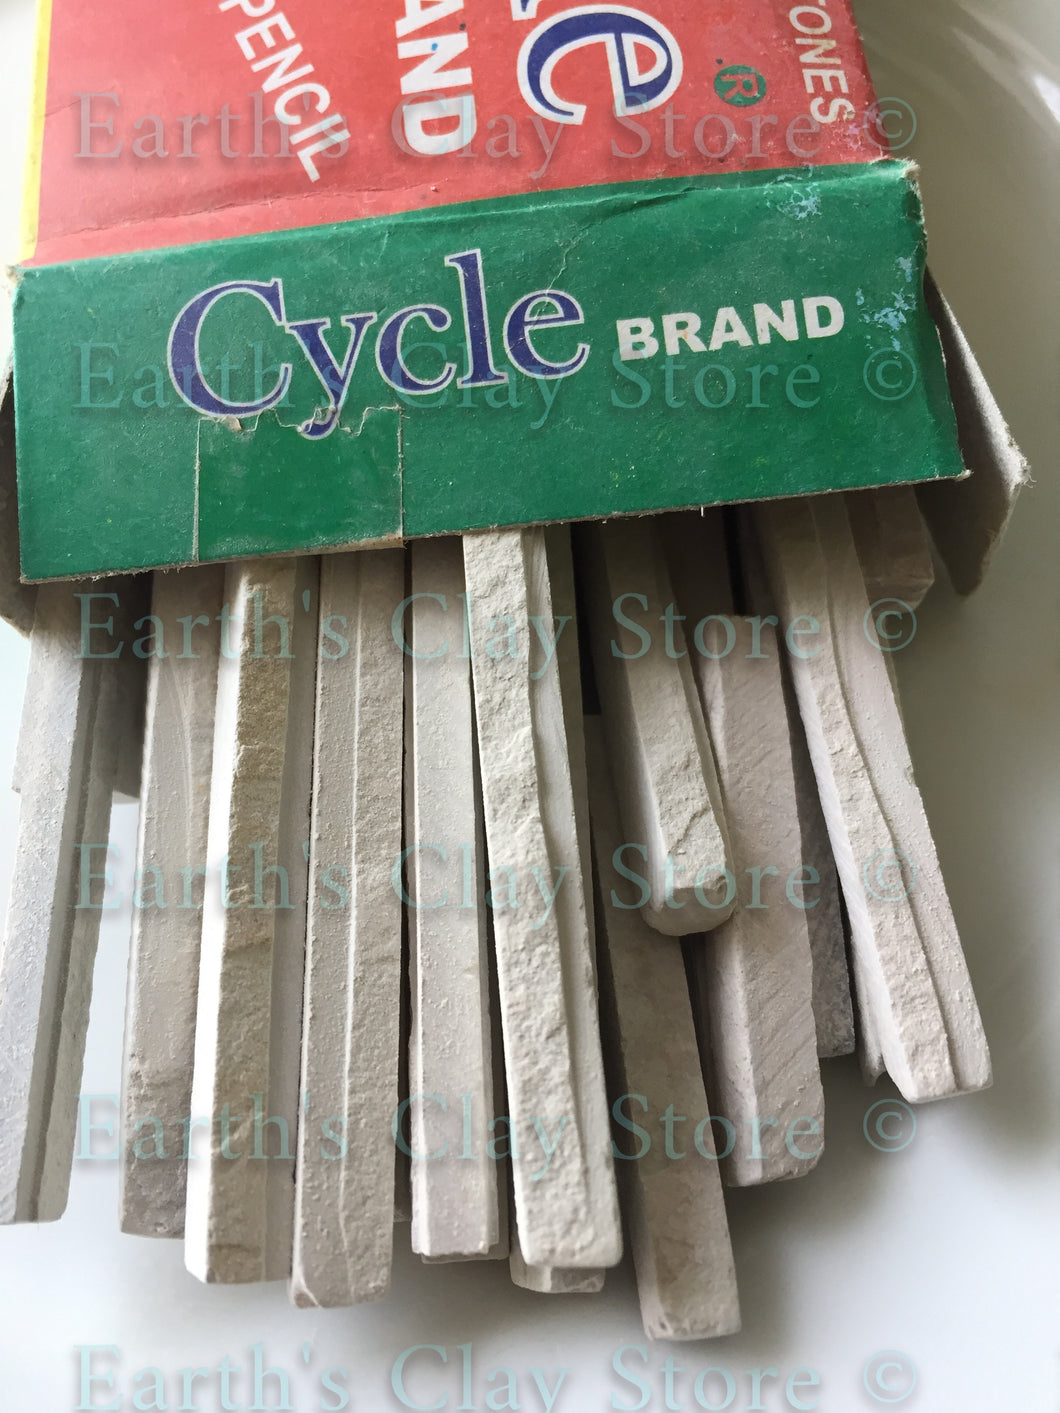 Cycle brand slate pencils are made from natural stone. These are thick and  wide ones.